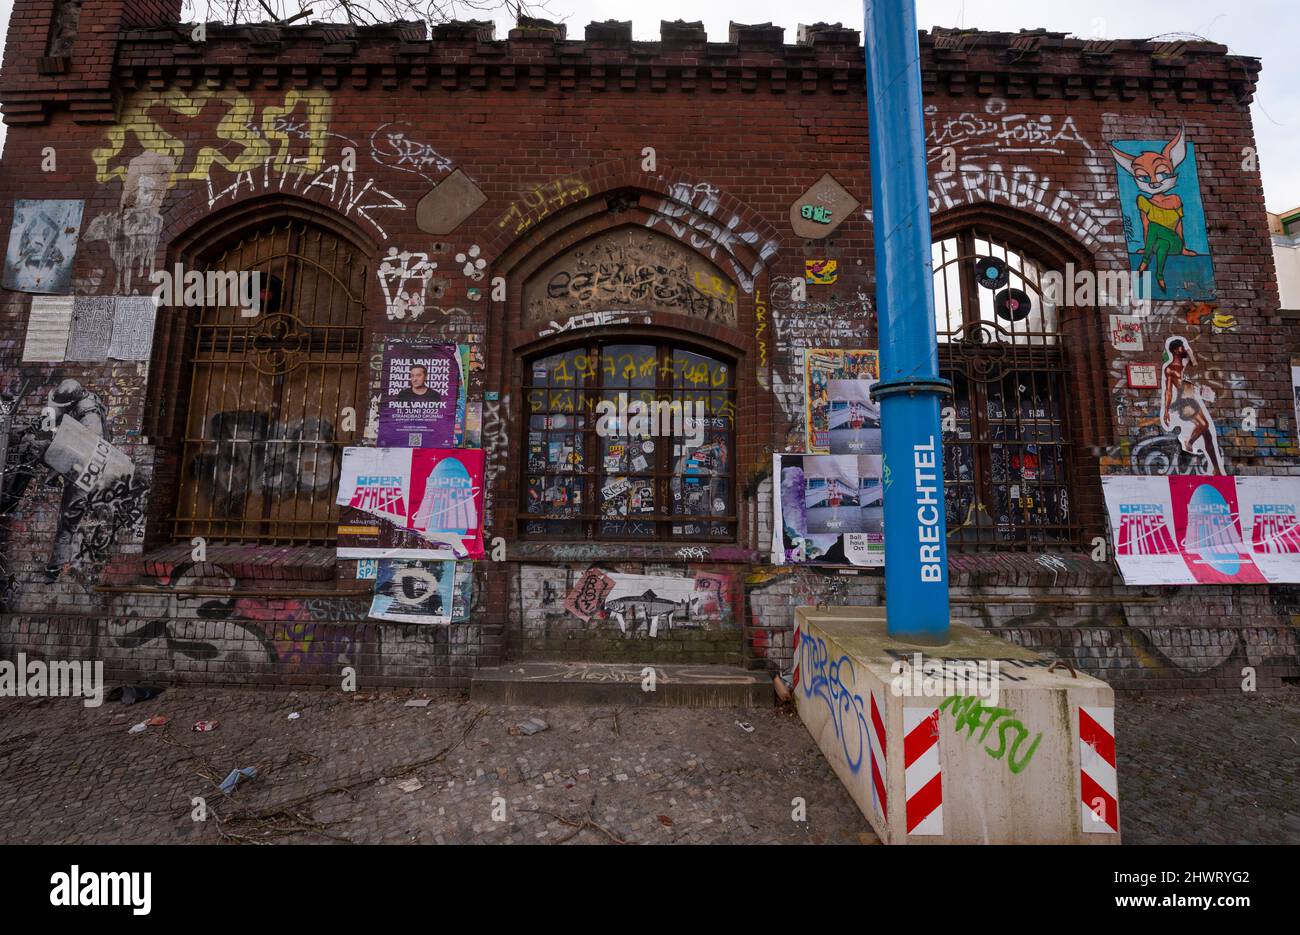 Postering and graffiti on a wall in the Kreuzberg section of Berlin, Germany. Stock Photo